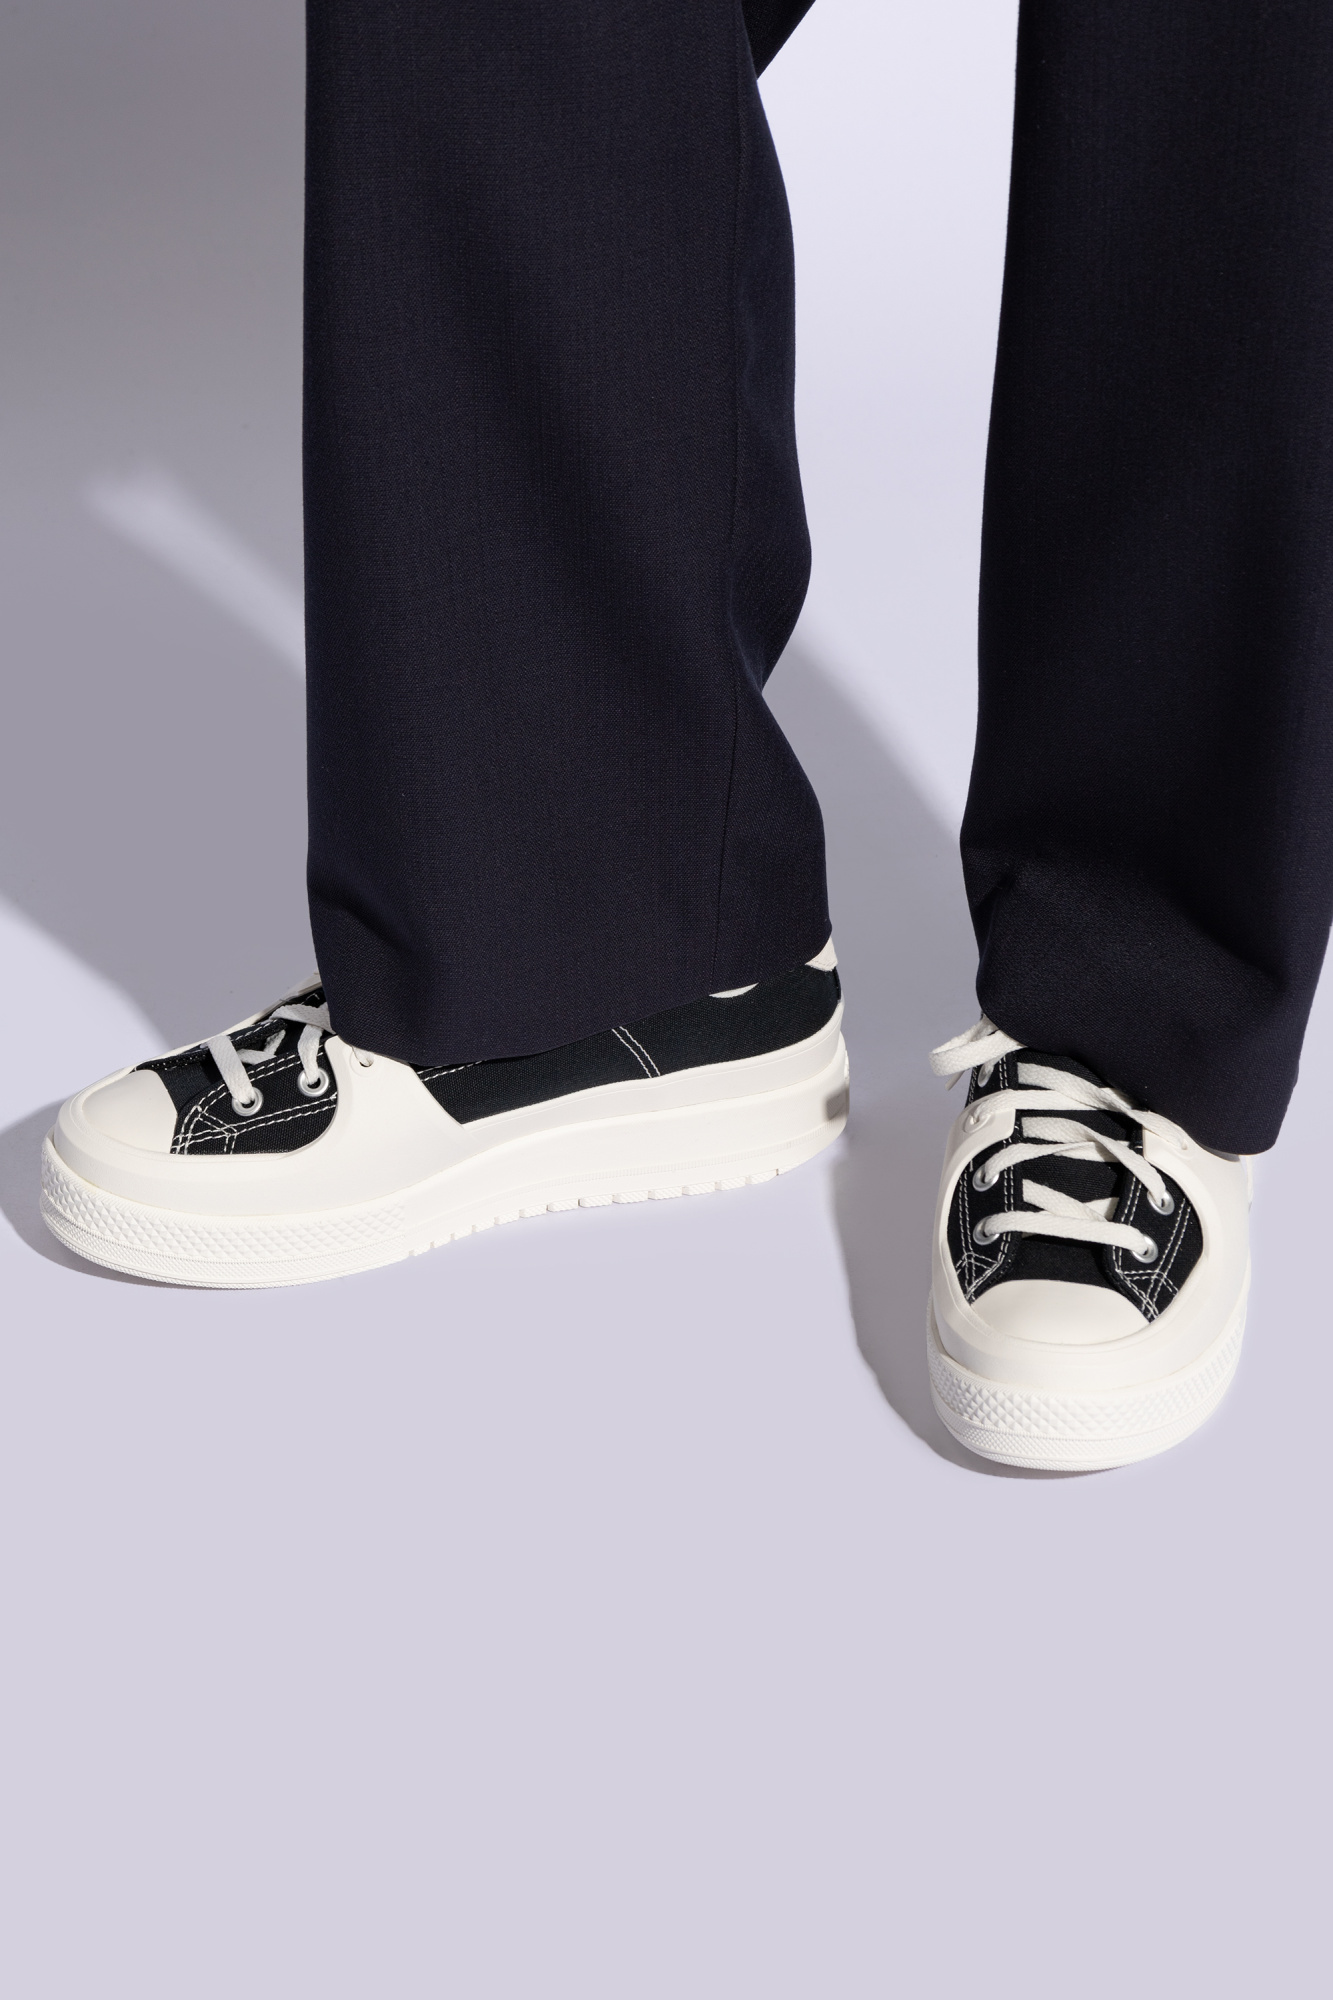 Converse ‘Stass Construct Ox’ sports Slip-on shoes